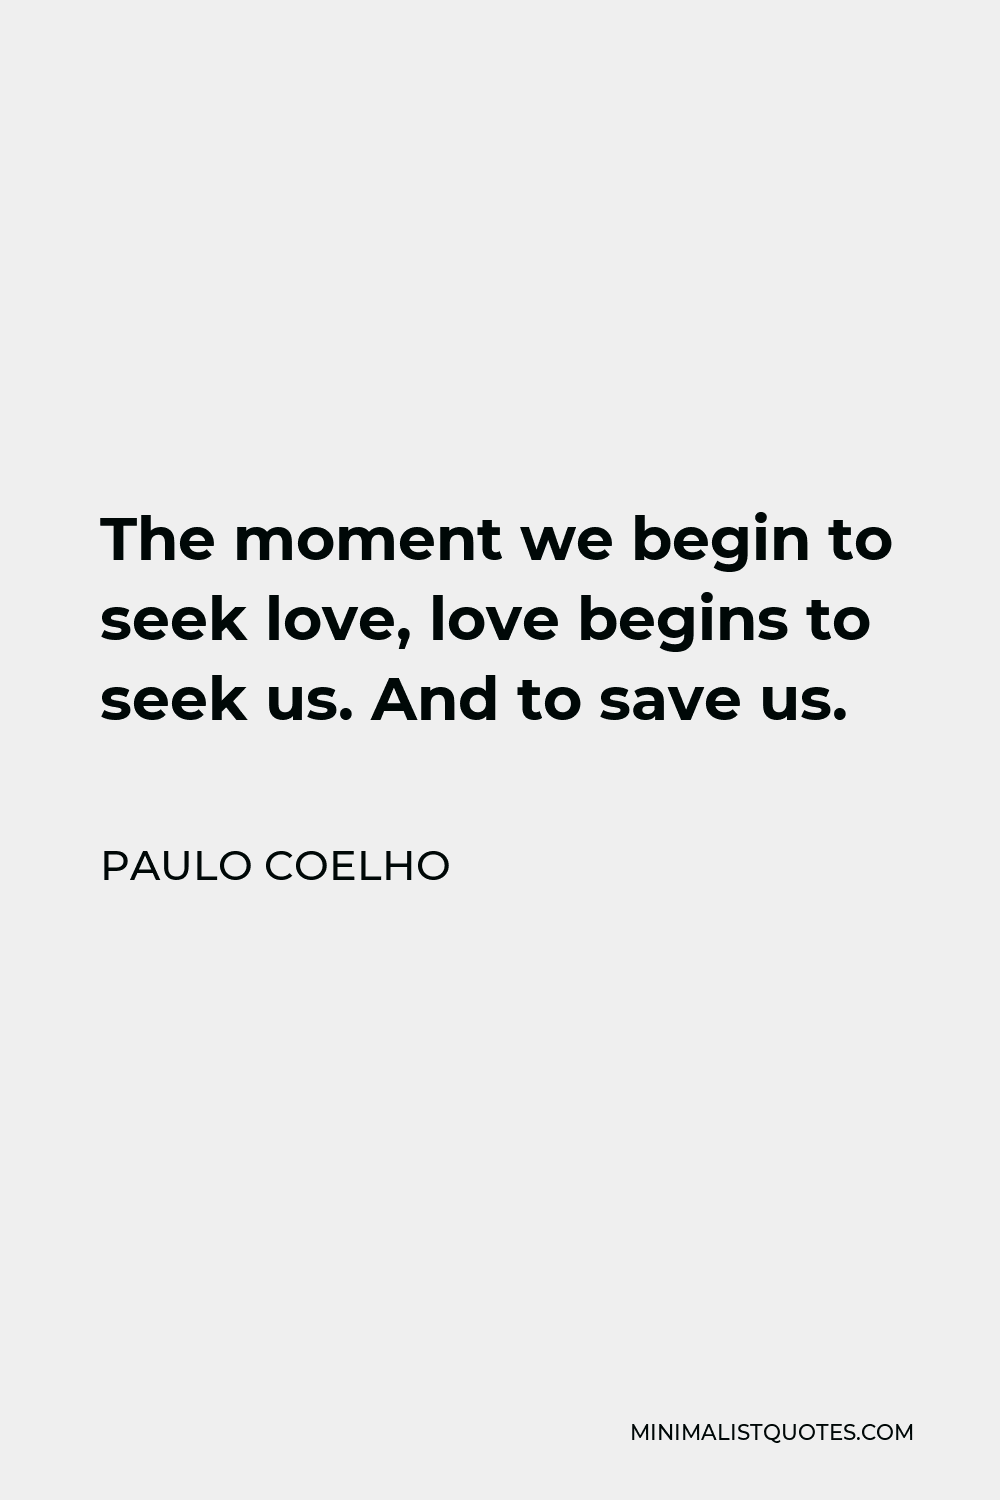 Paulo Coelho Quote - The moment we begin to seek love, love begins to seek us. And to save us.